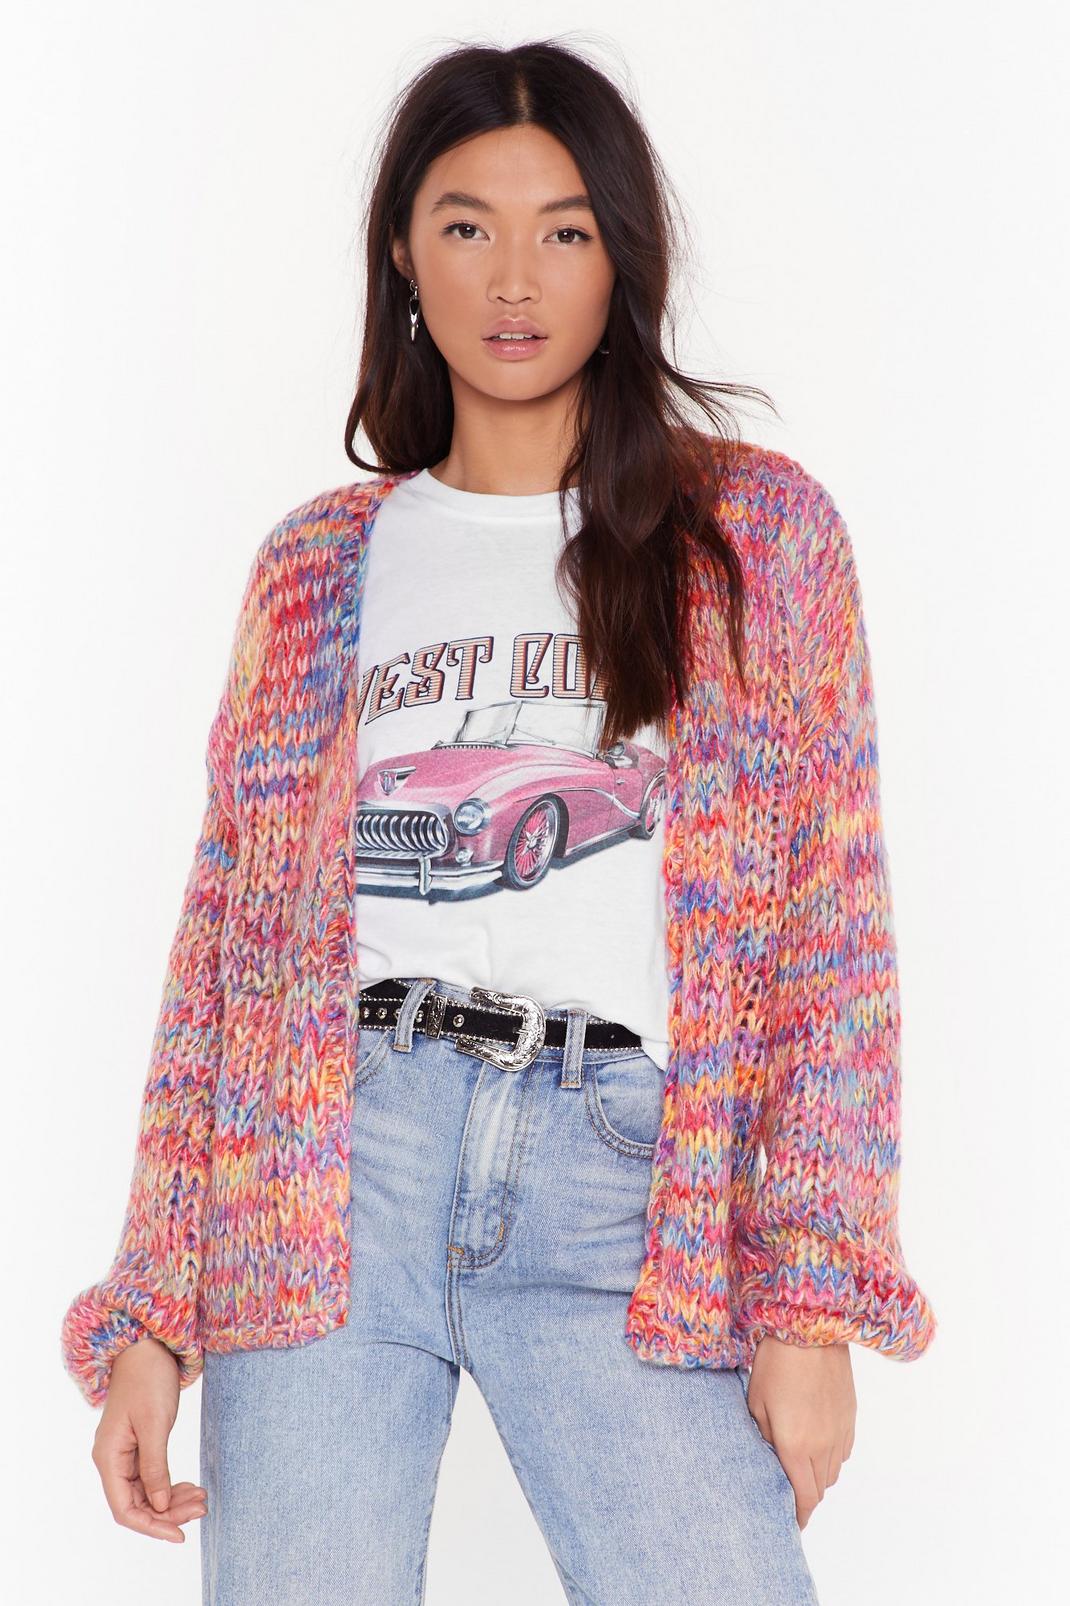 What Flavor Multicolored Chunky Knit Cardigan